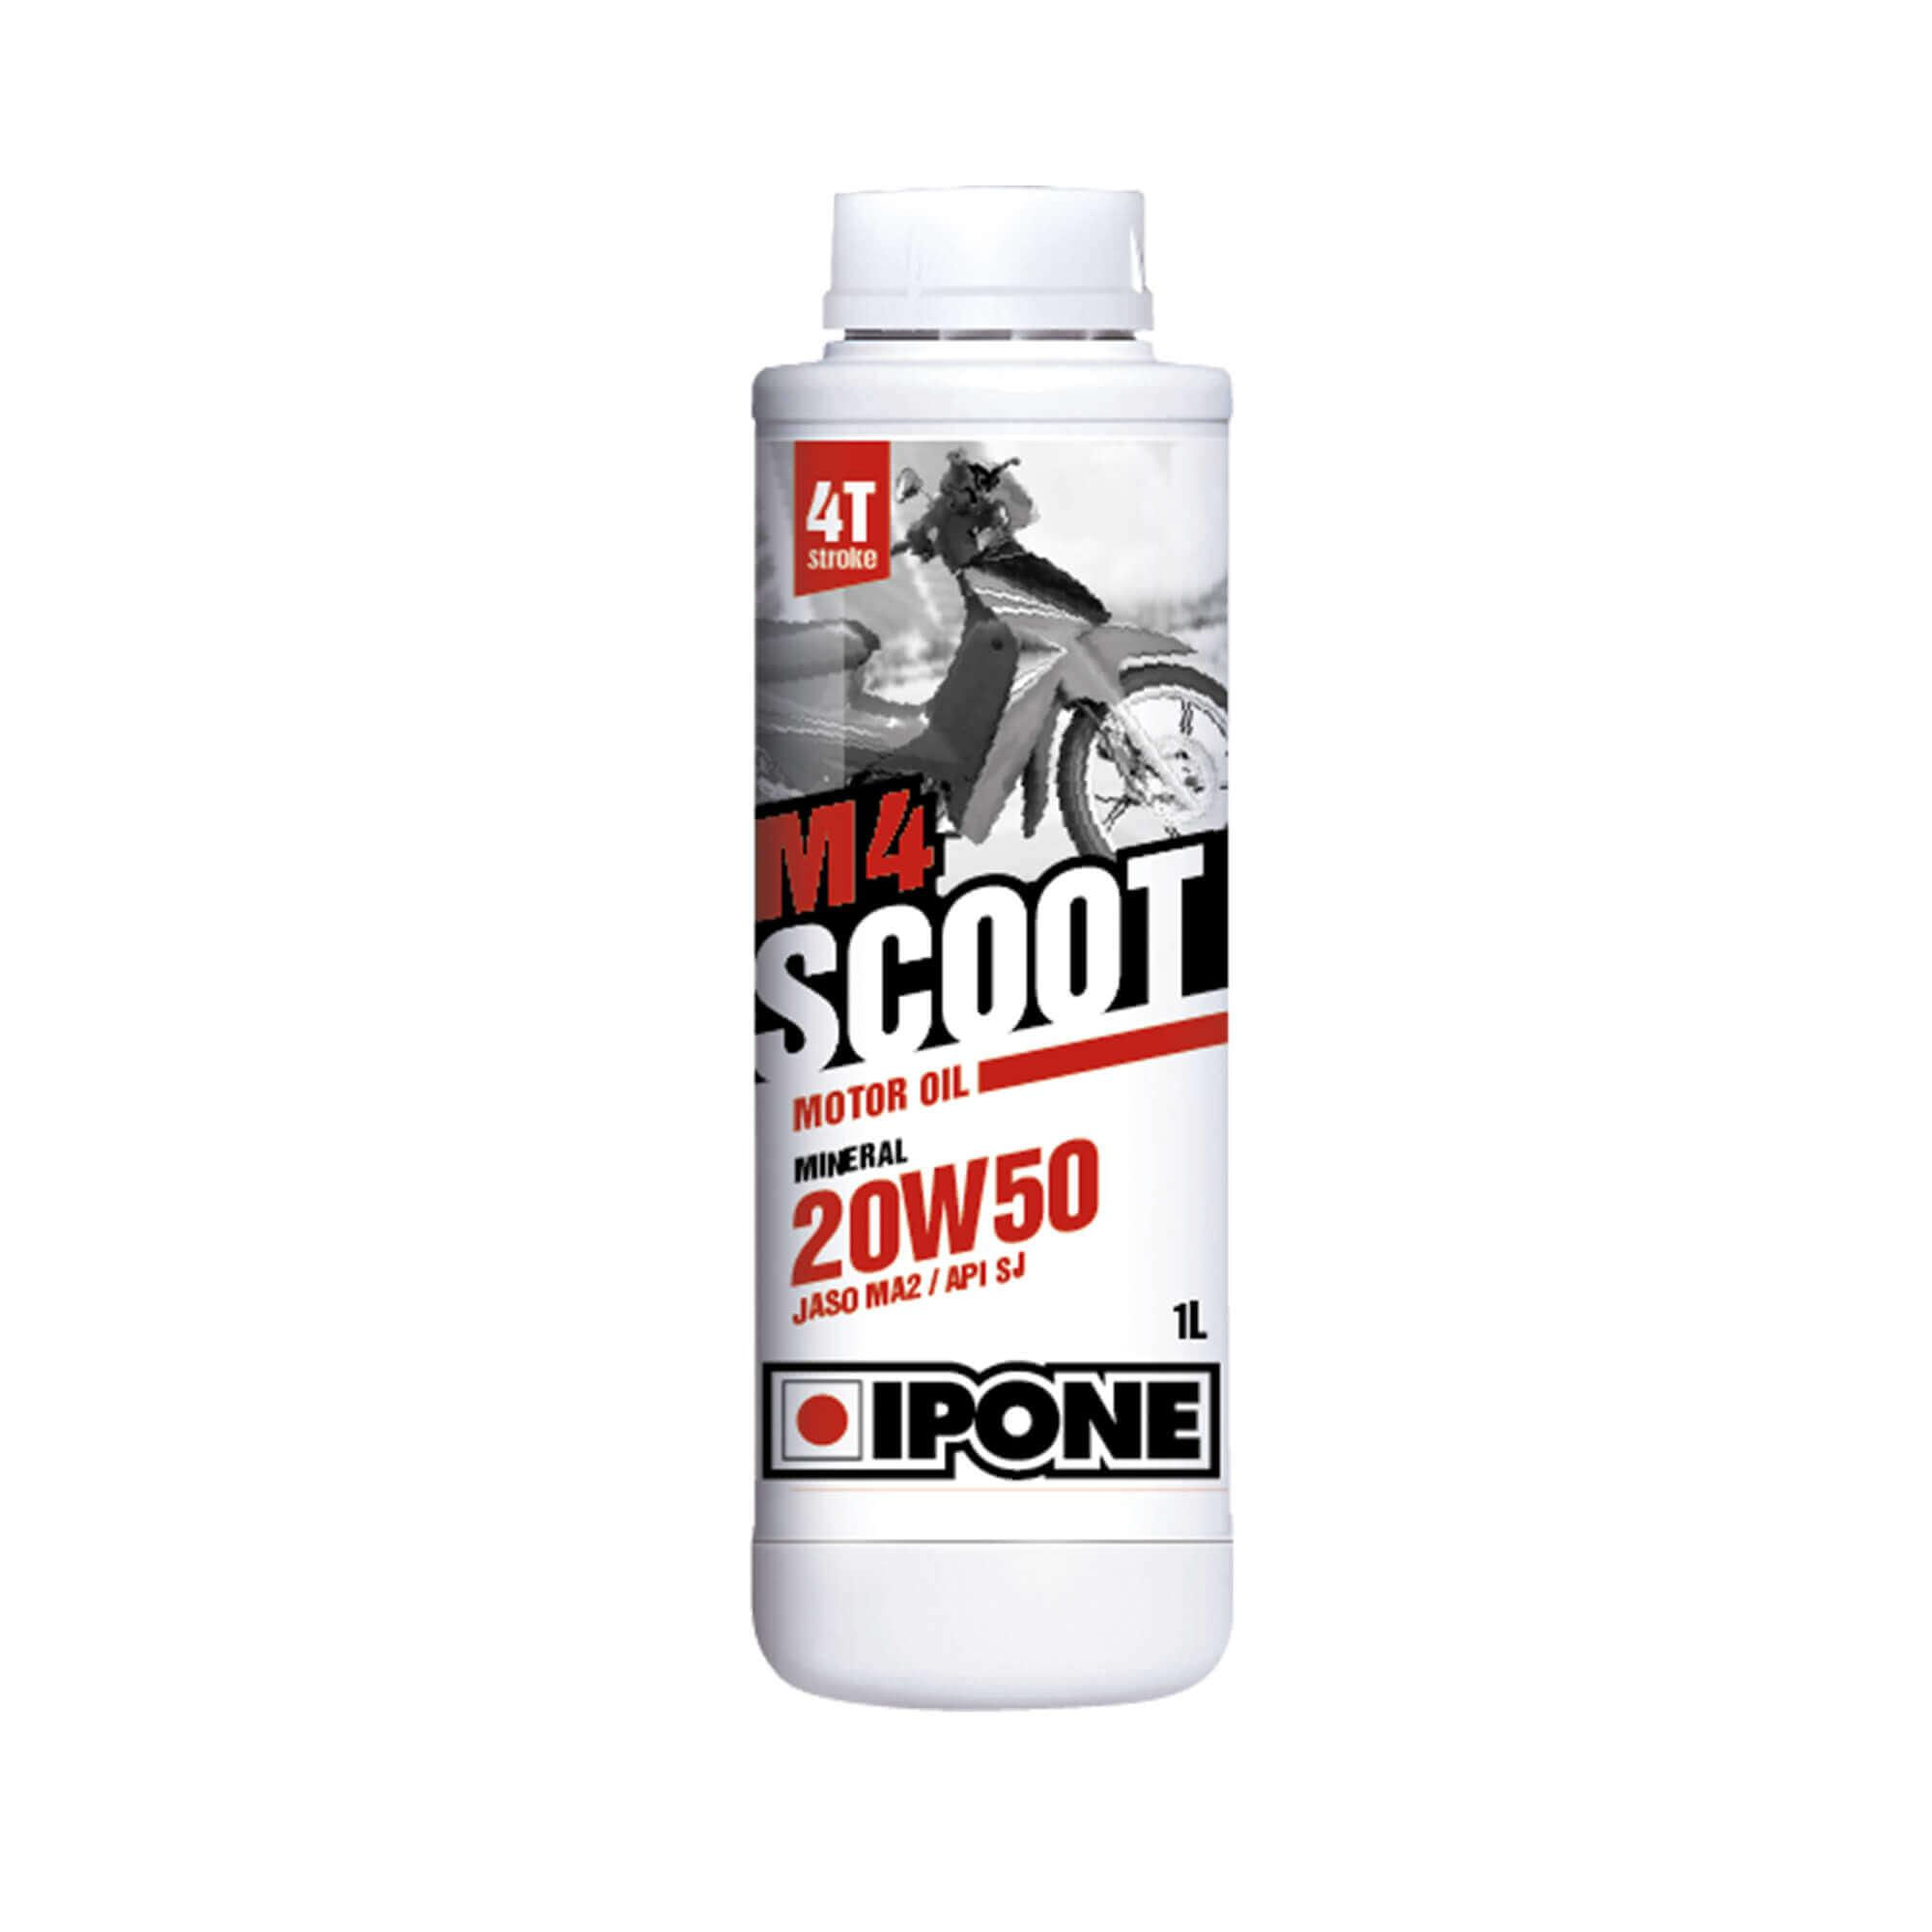 Aceite Para Moto Ipone M4 Scoot 20W50 Mineral 1L